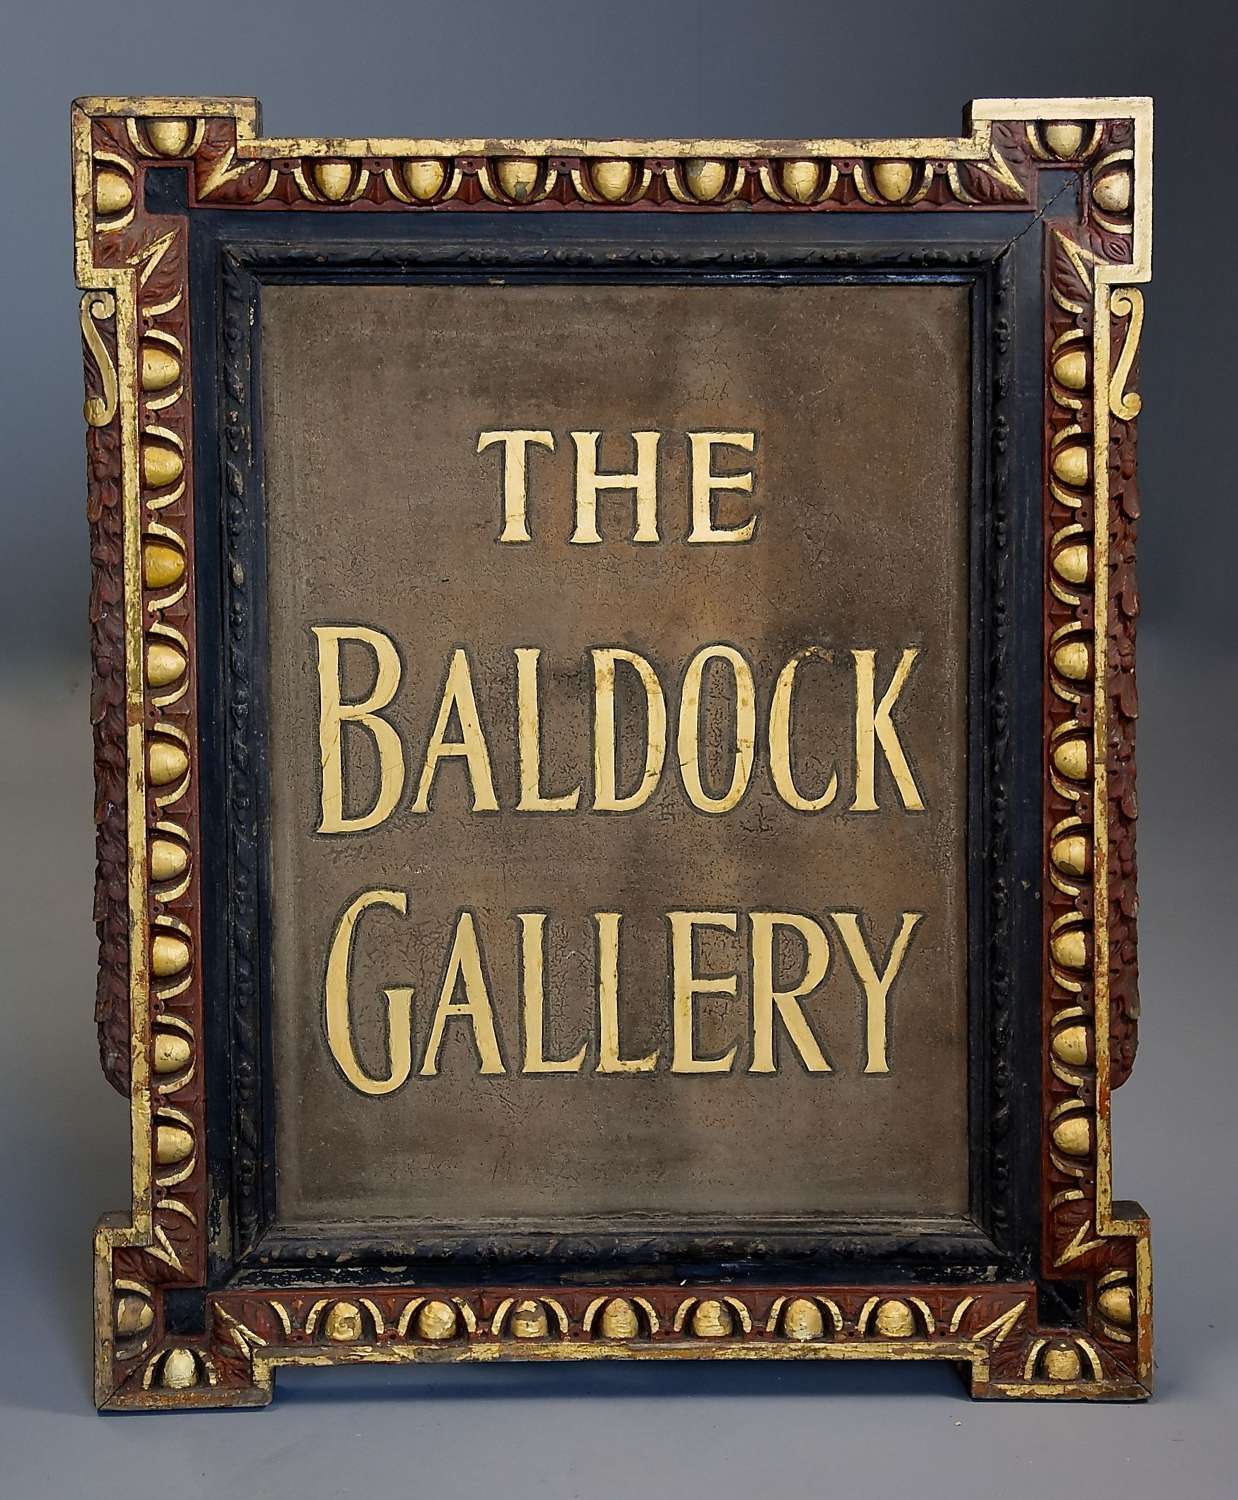 Early 20th century carved wood shop sign of ‘THE BALDOCK GALLERY’